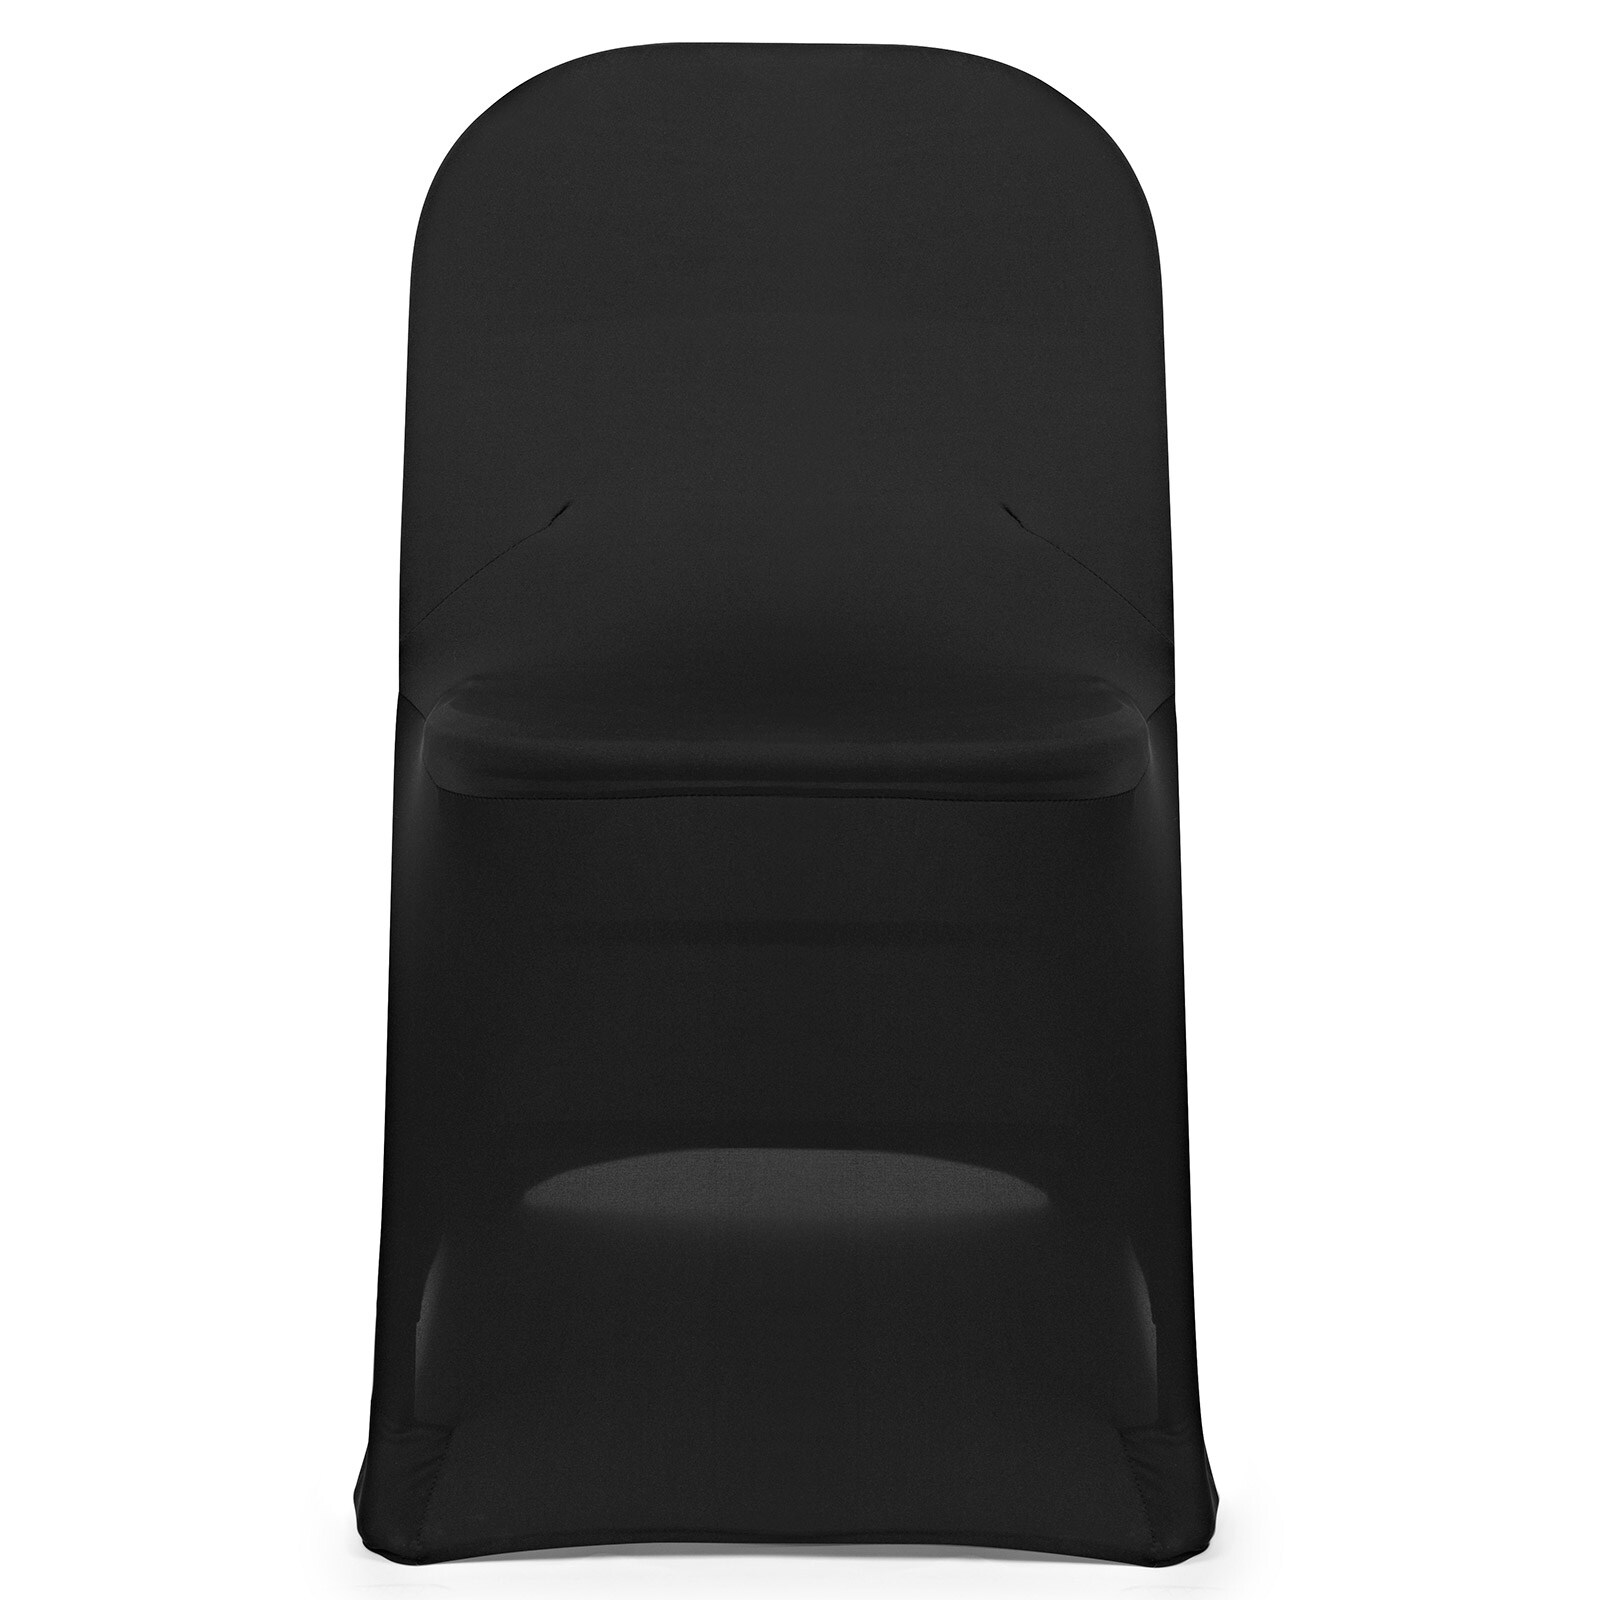 100-Count Spandex Folding Chair Covers - Black - Bed Bath & Beyond